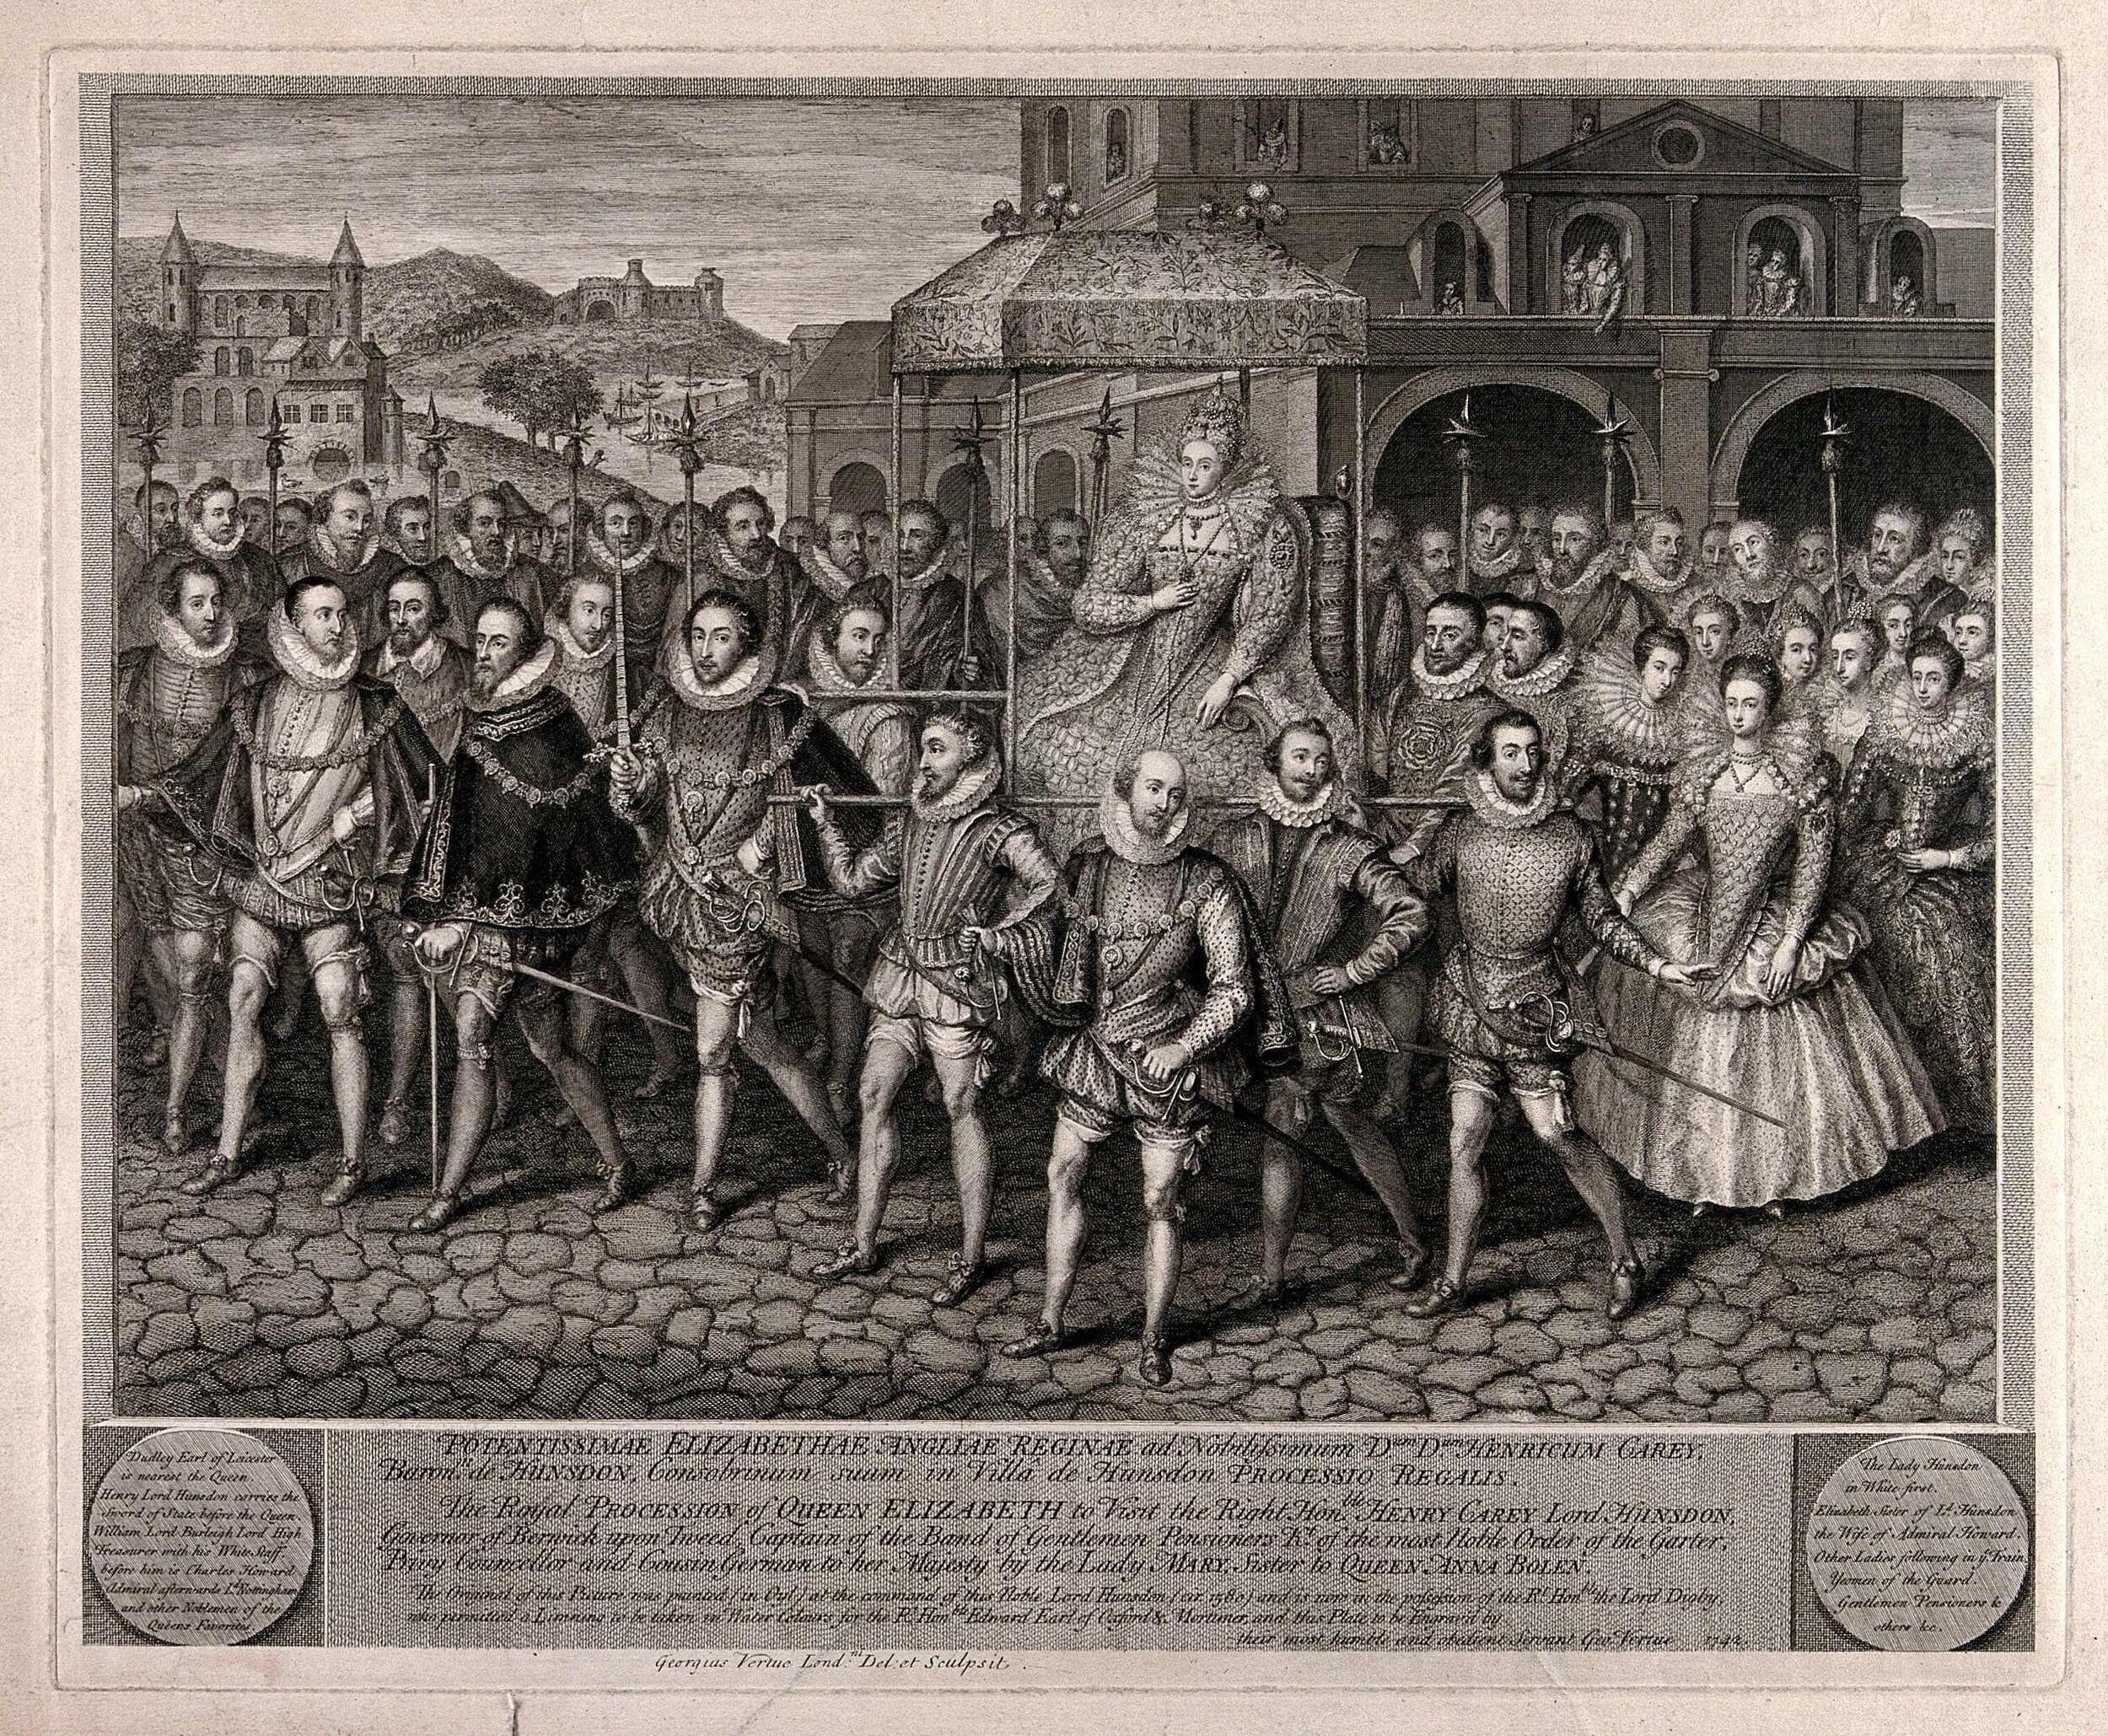 The visit of Queen Elizabeth I to Lord Hunsdon (for his marriage at Blackfriars in 1600)